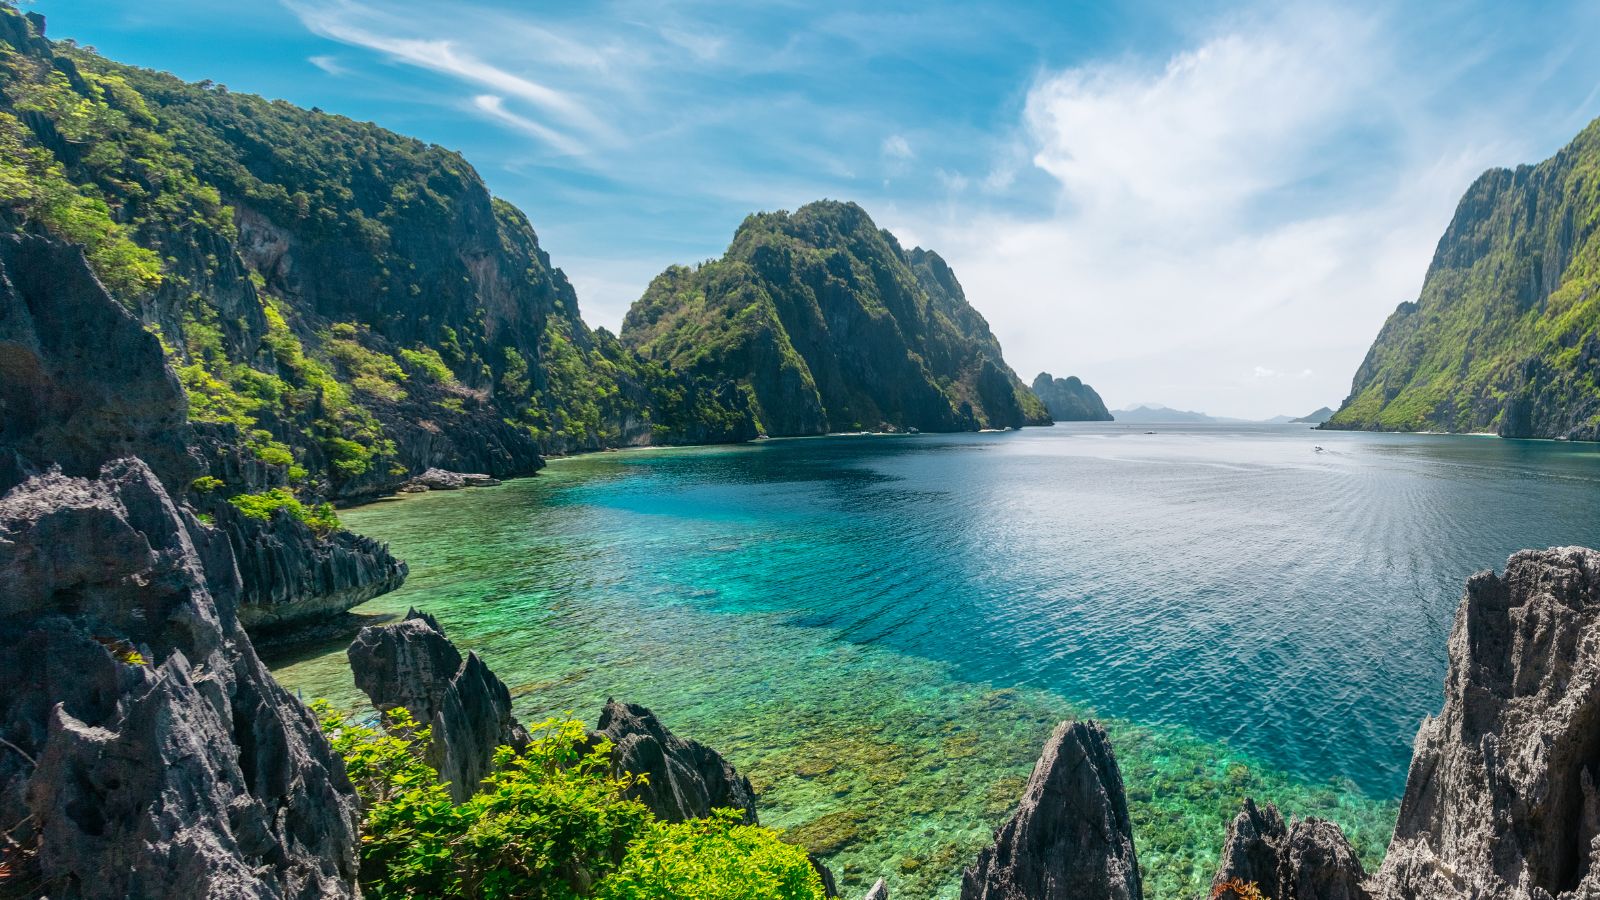 Discover the Philippines